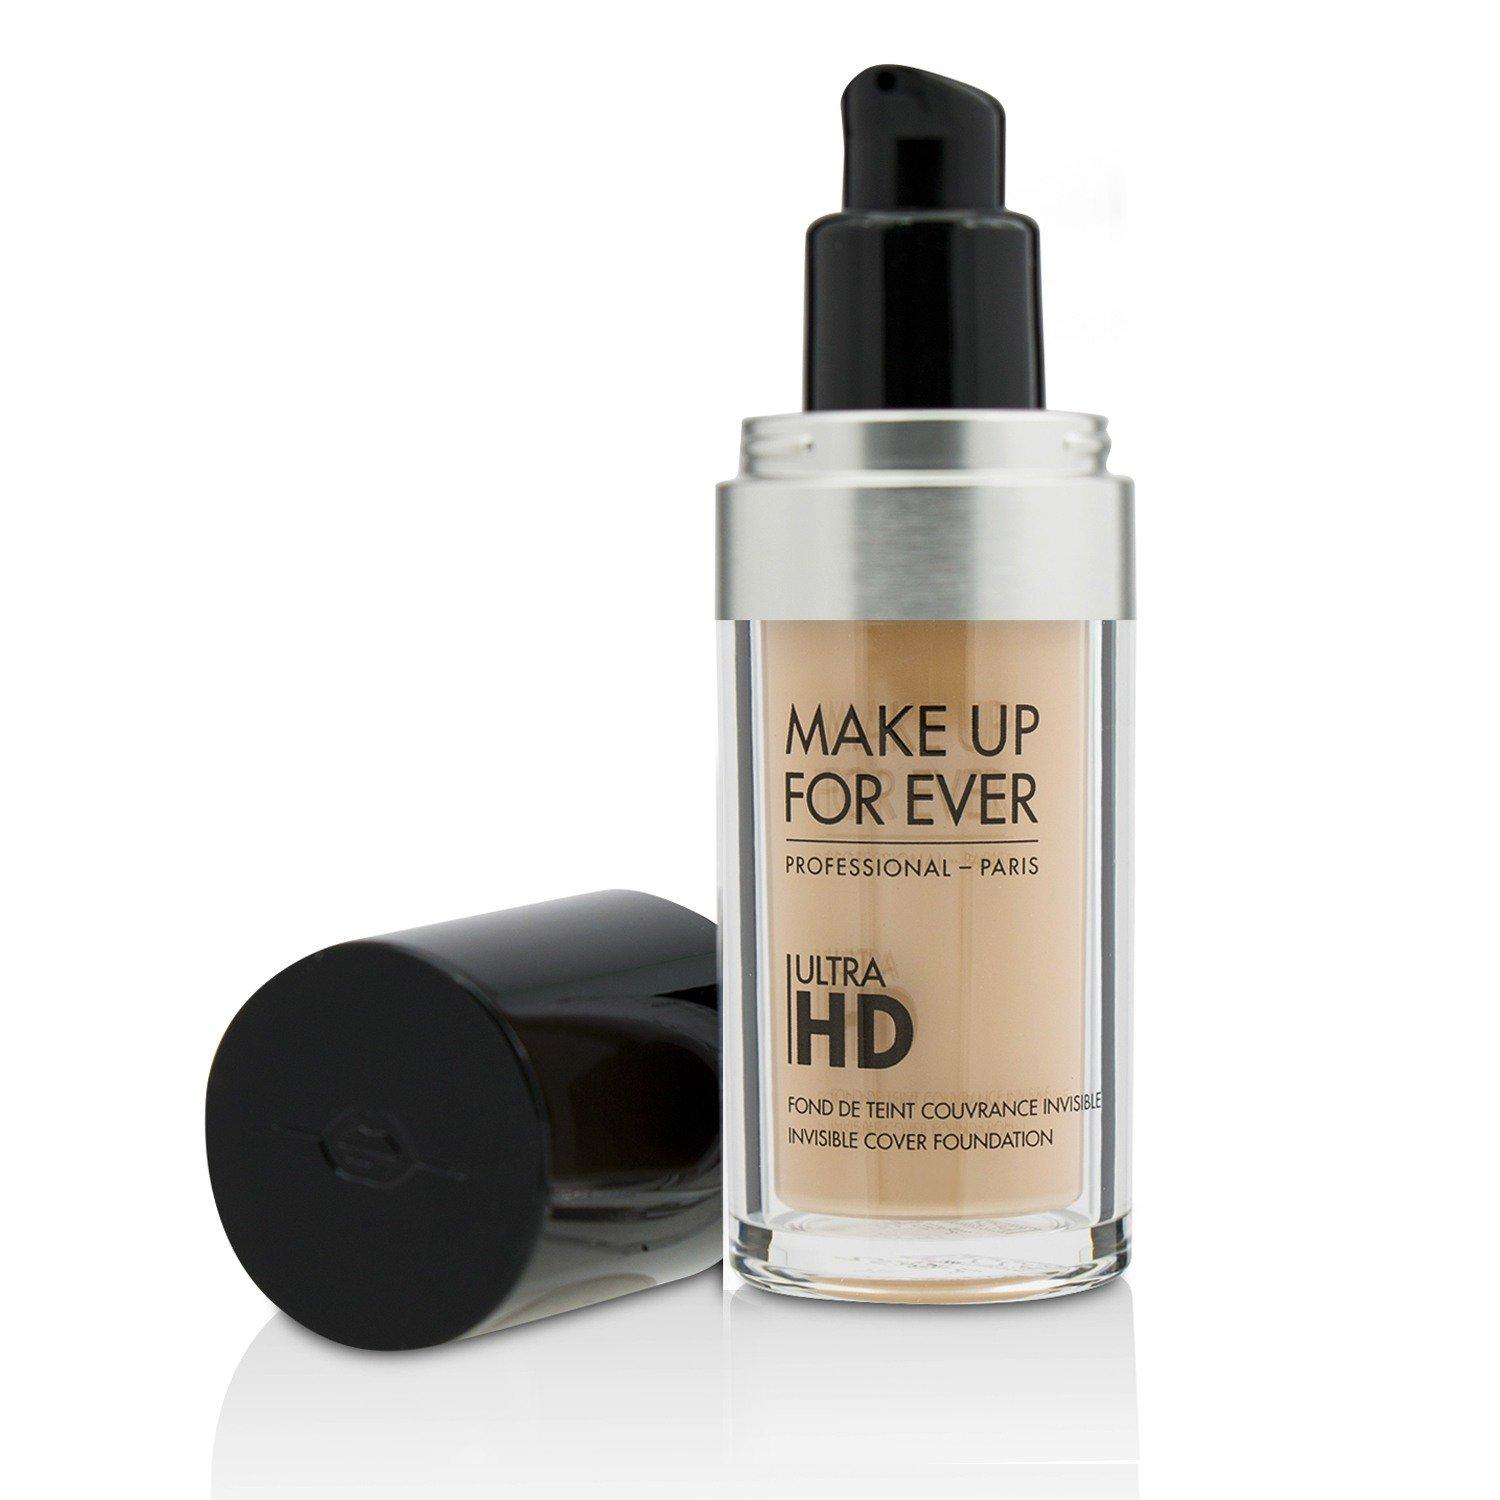 MAKE UP FOR EVER Ultra HD Foundation - Invisible Cover Foundation